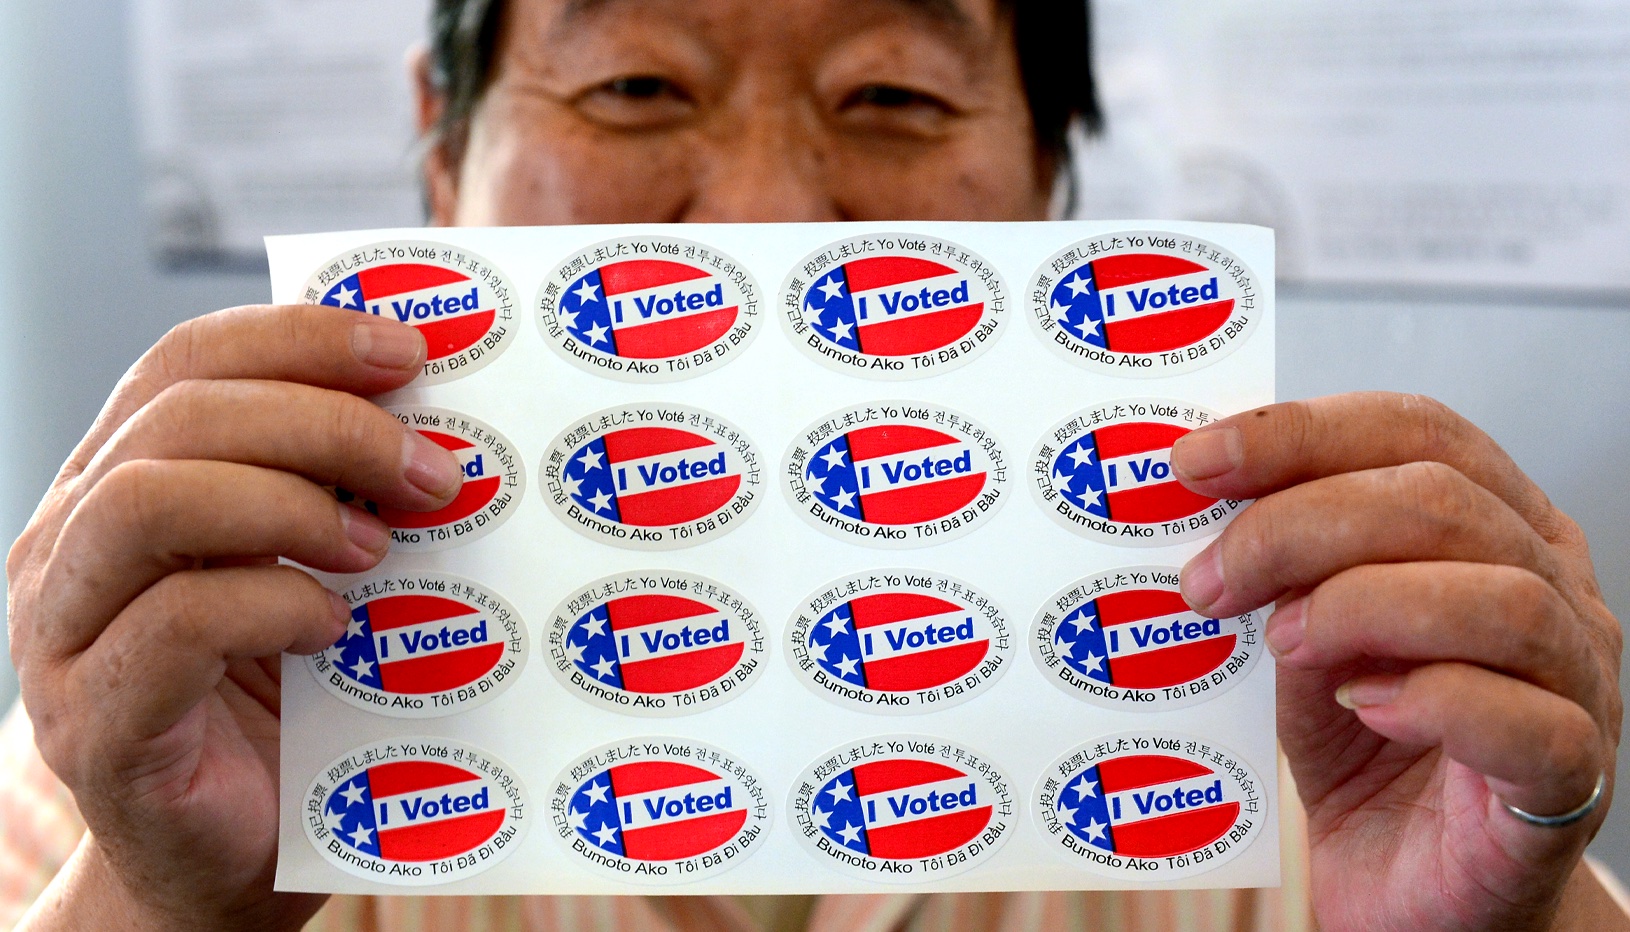 Asian American man holding "I Voted" stickers